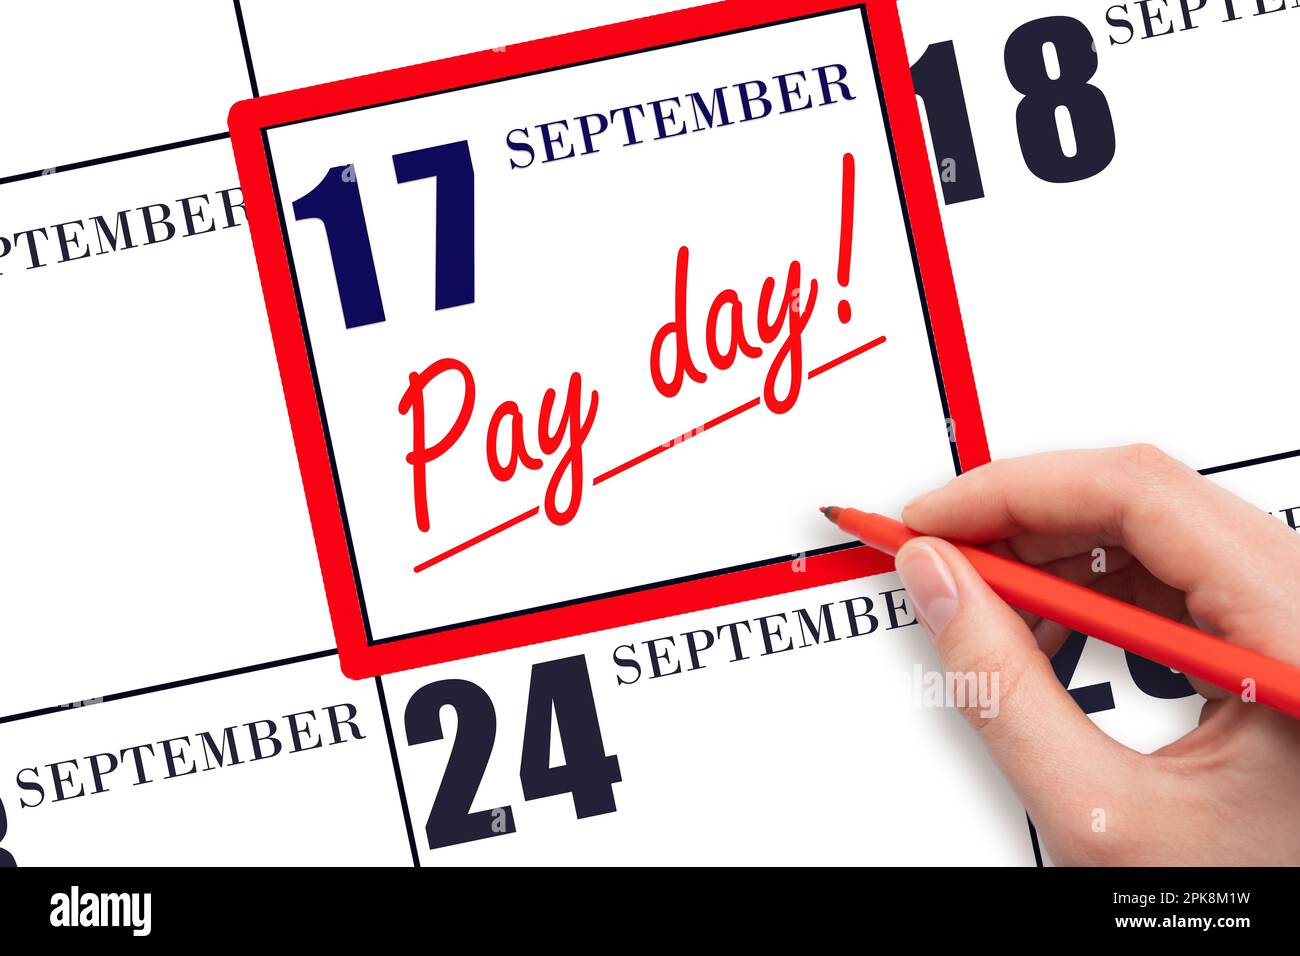 17th day of September. Hand writing text PAY DATE on calendar date September 17 and underline it. Payment due date. Reminder concept of payment. Autum Stock Photo